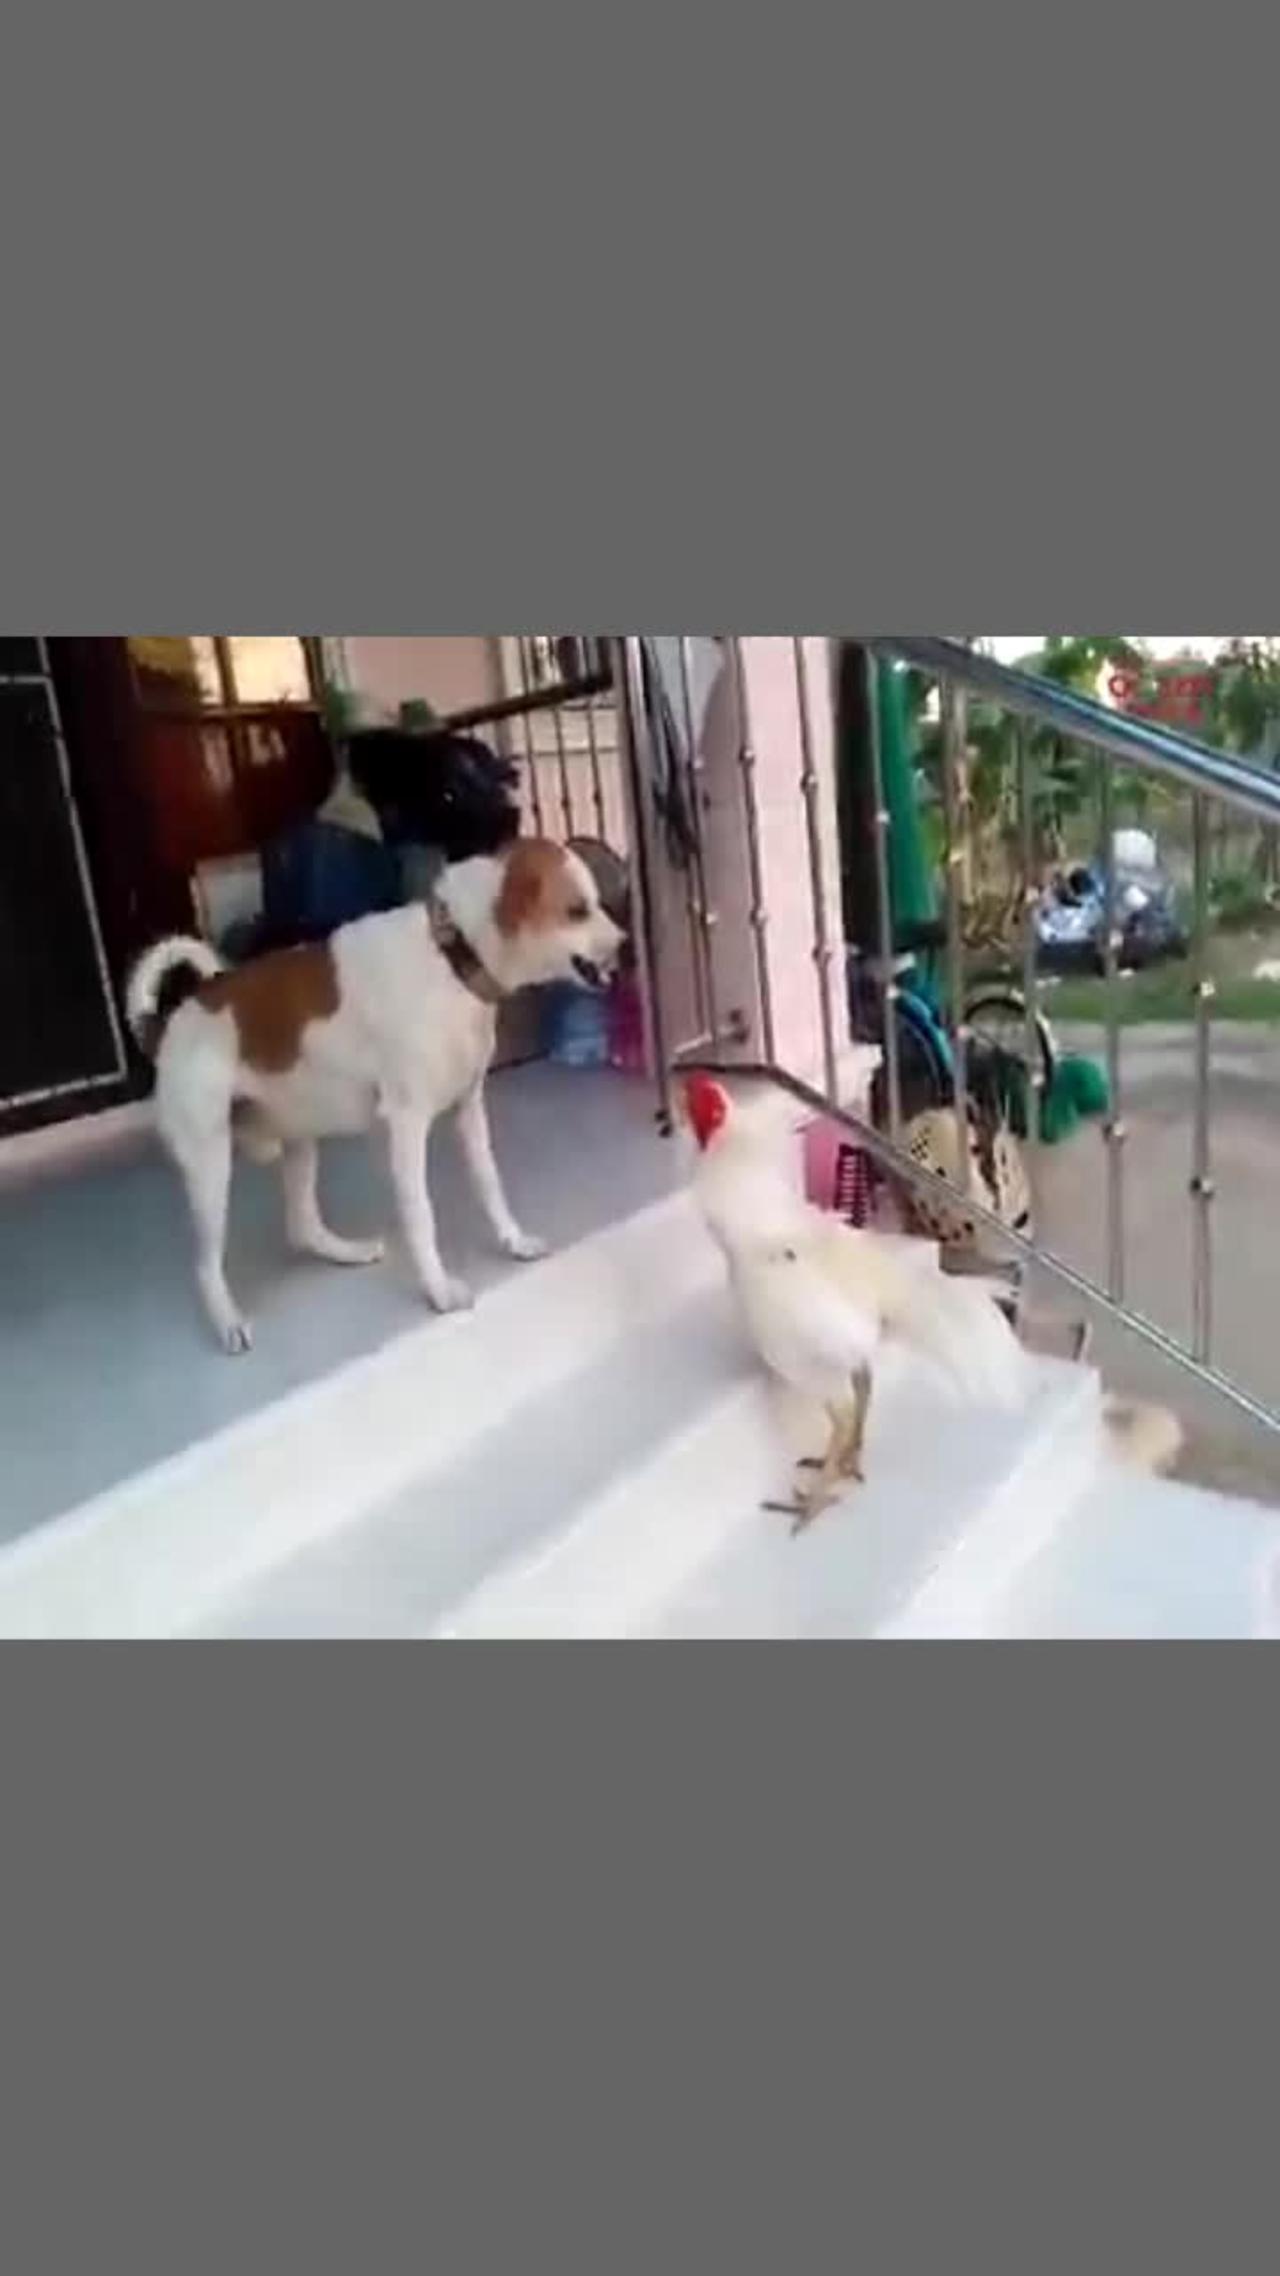 Cute dog 🐕 And Chicken 🐔 funny fight video 📹